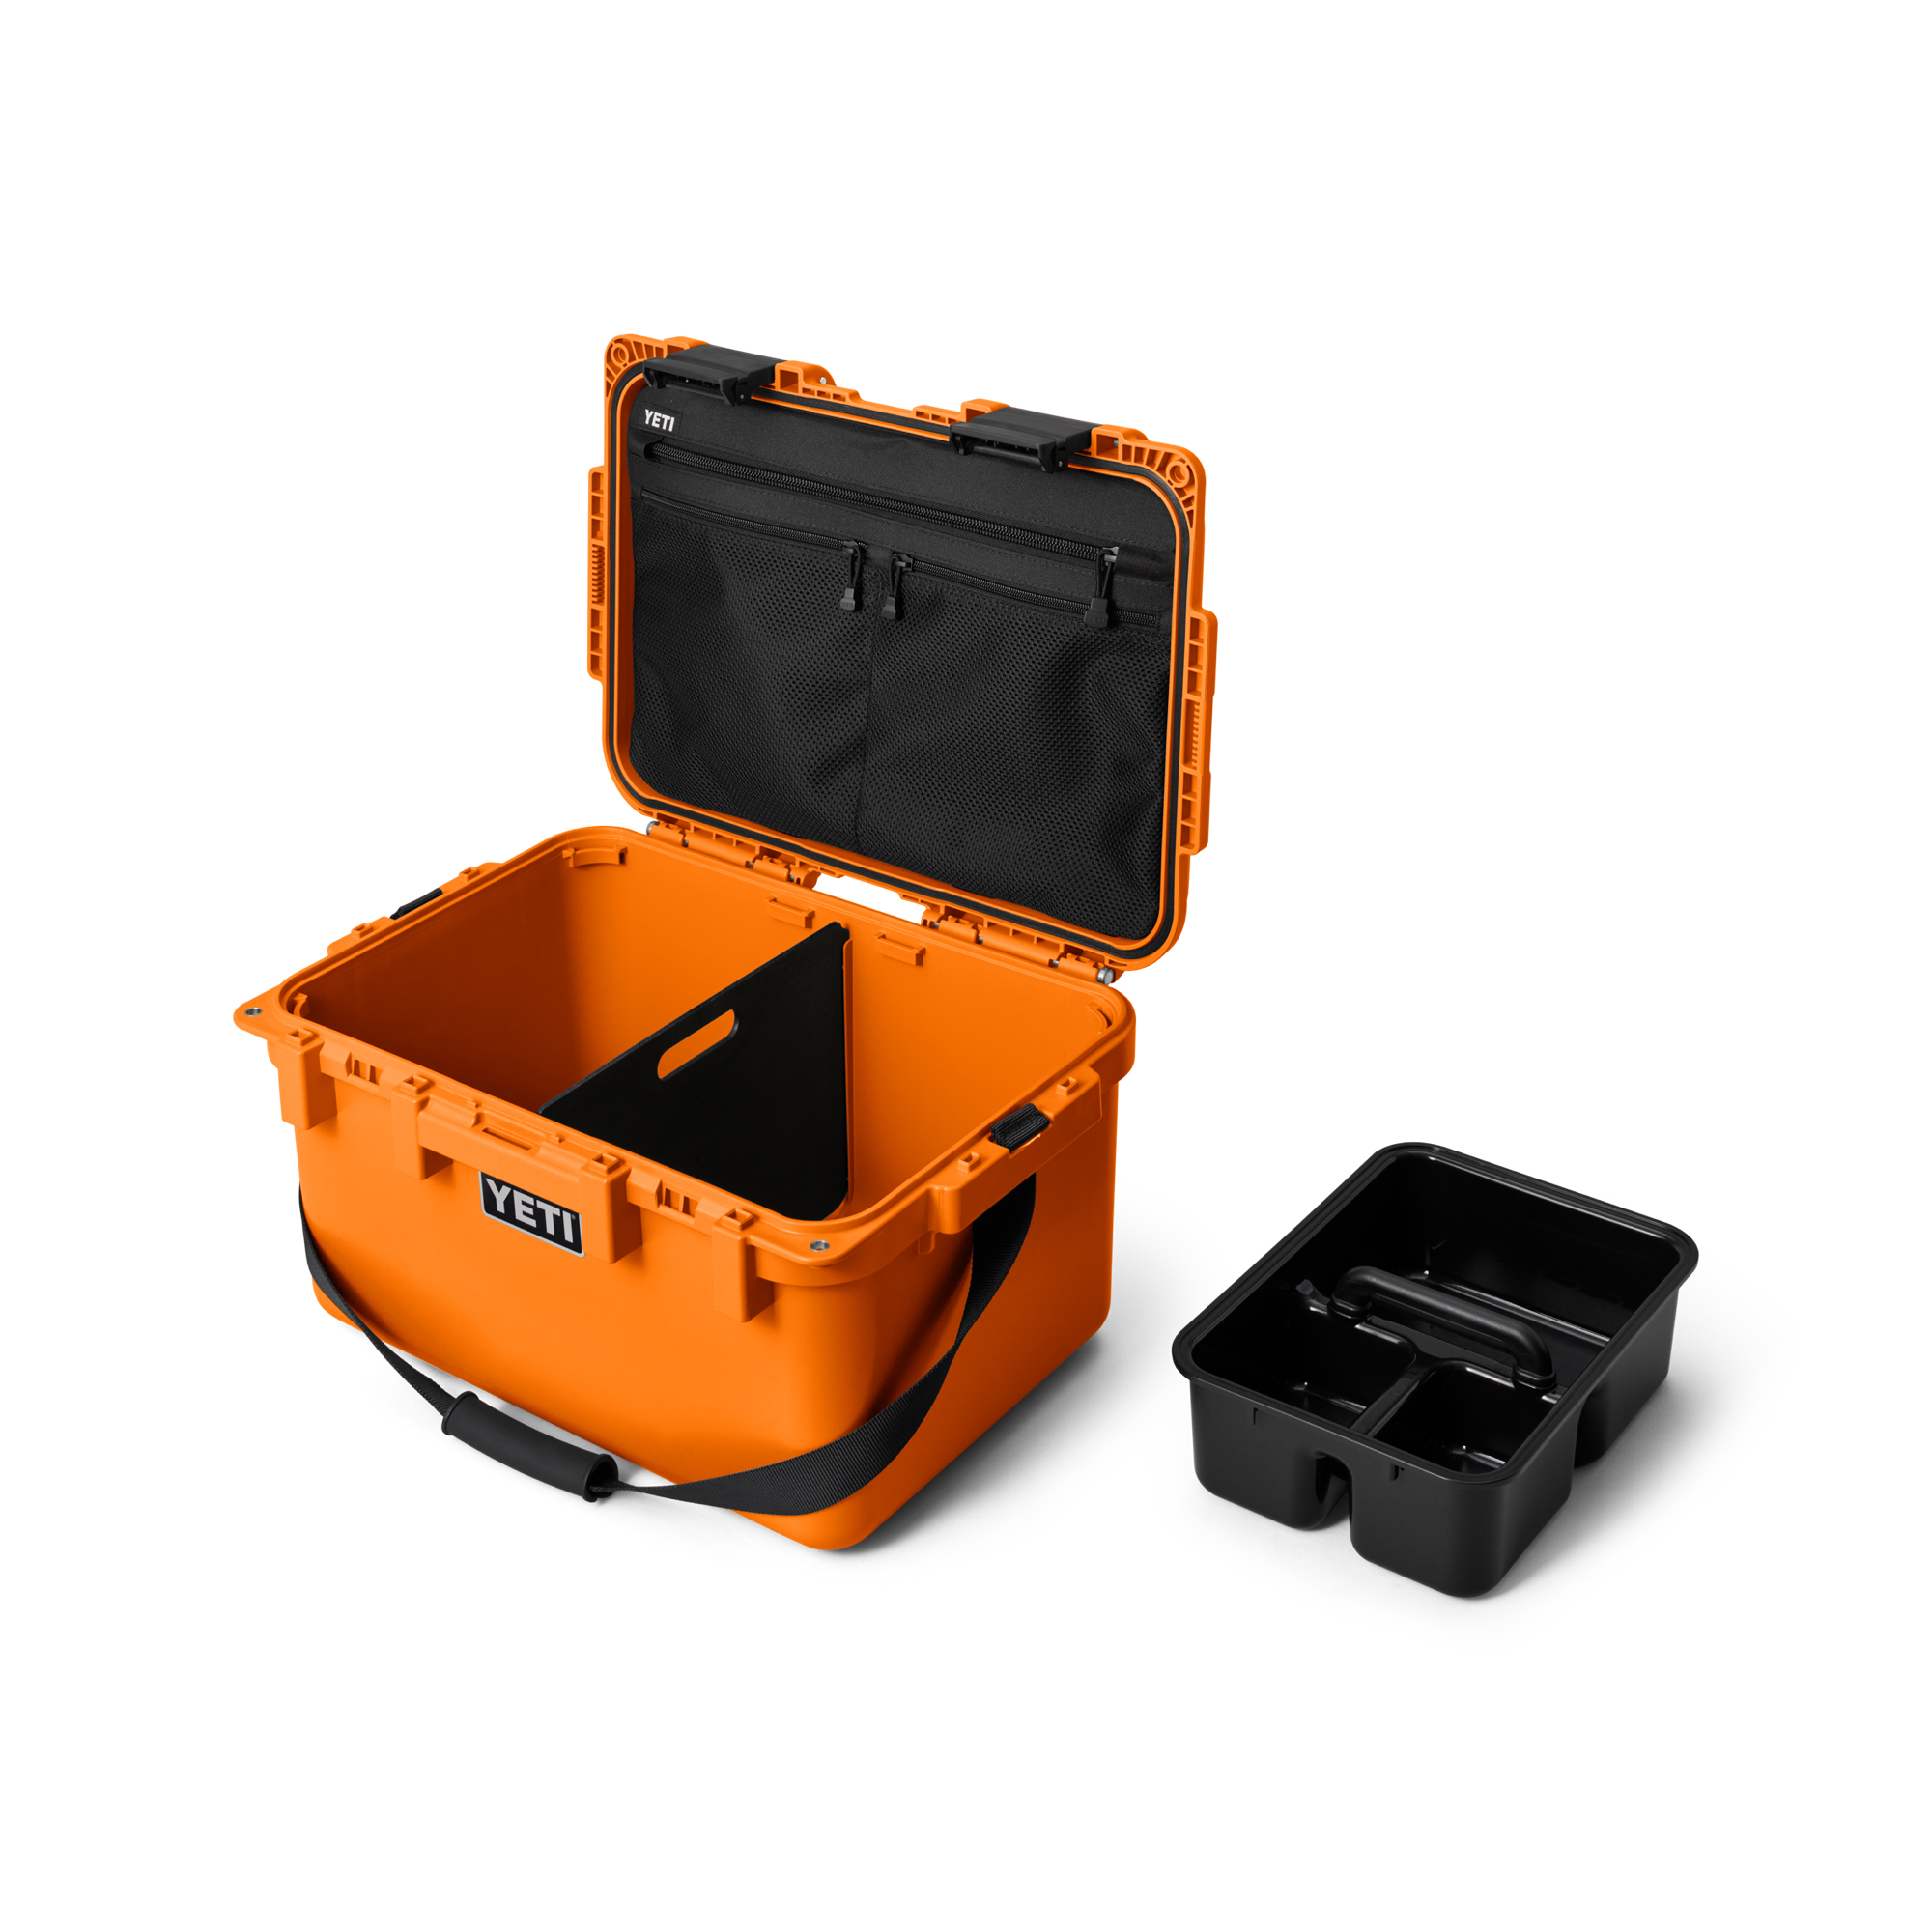 Introducing the NEW Yeti Loadout - Tackle Box Victoria